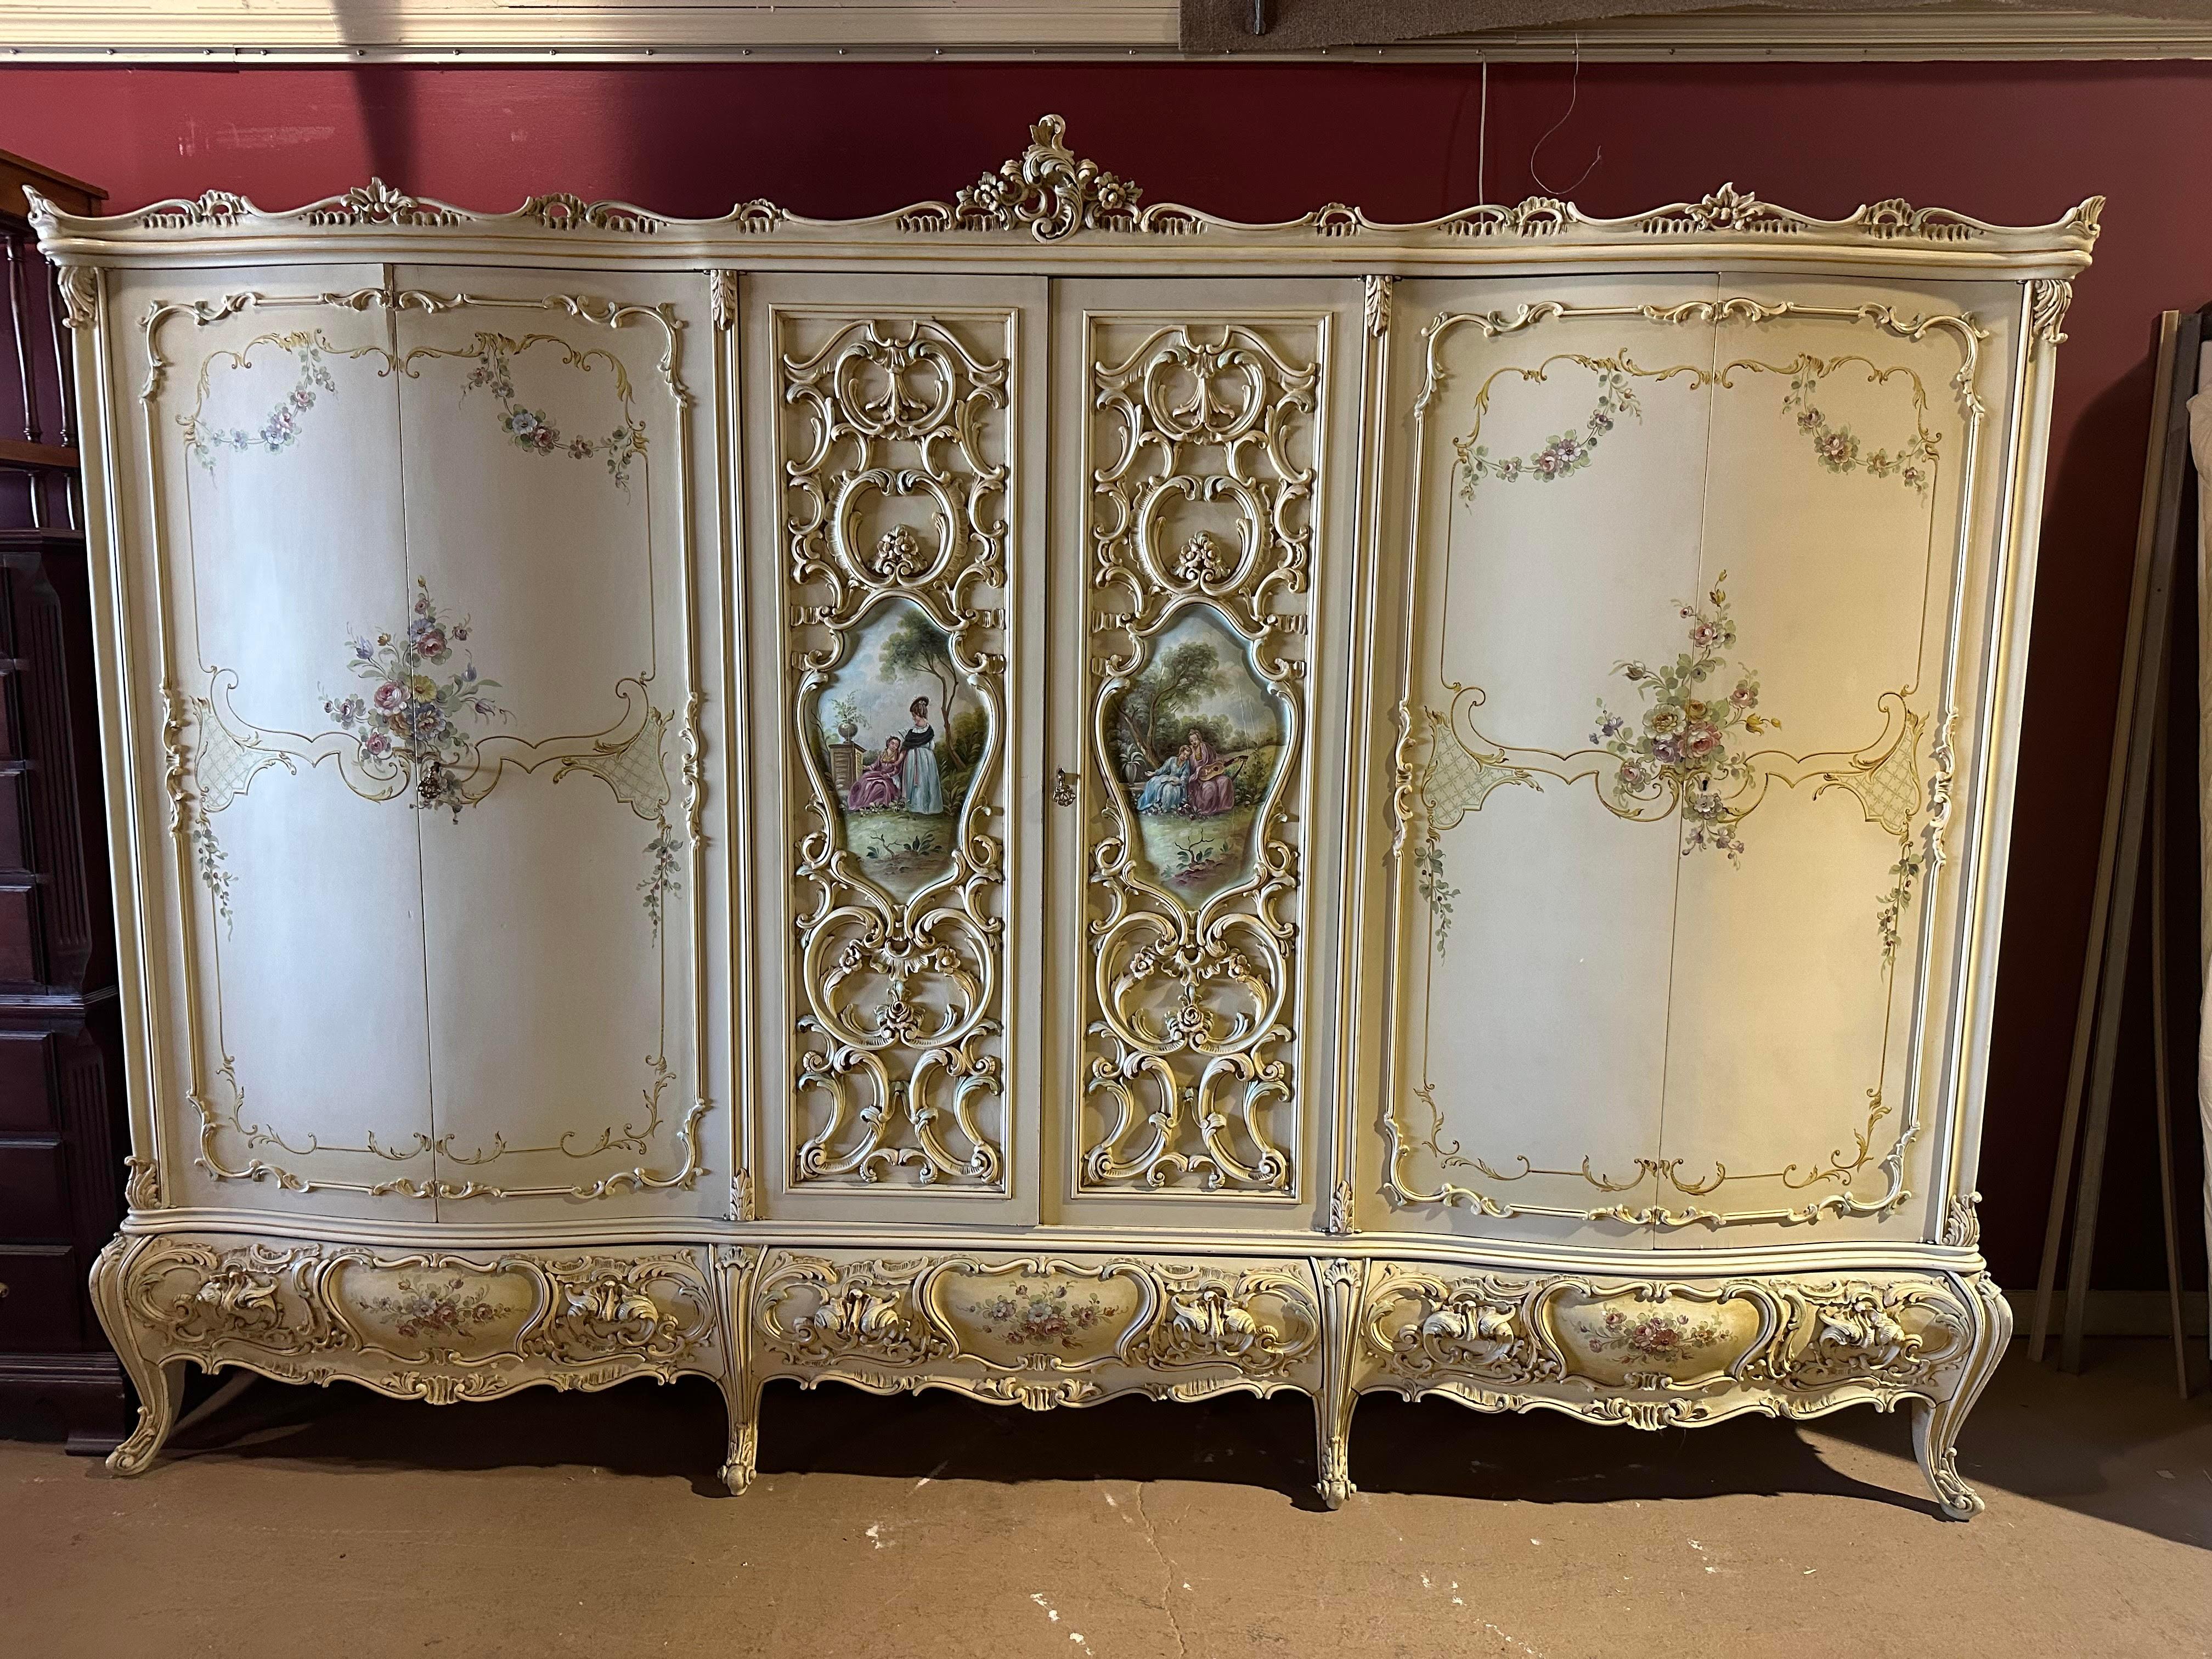 This is a monumental sprawling armoire at 121 inches wide. The armoire features beautiful hand-painted maidens and classical scenery and carving and just promotes a sense of majesty and romance. The colors are muted and in the pastel family and